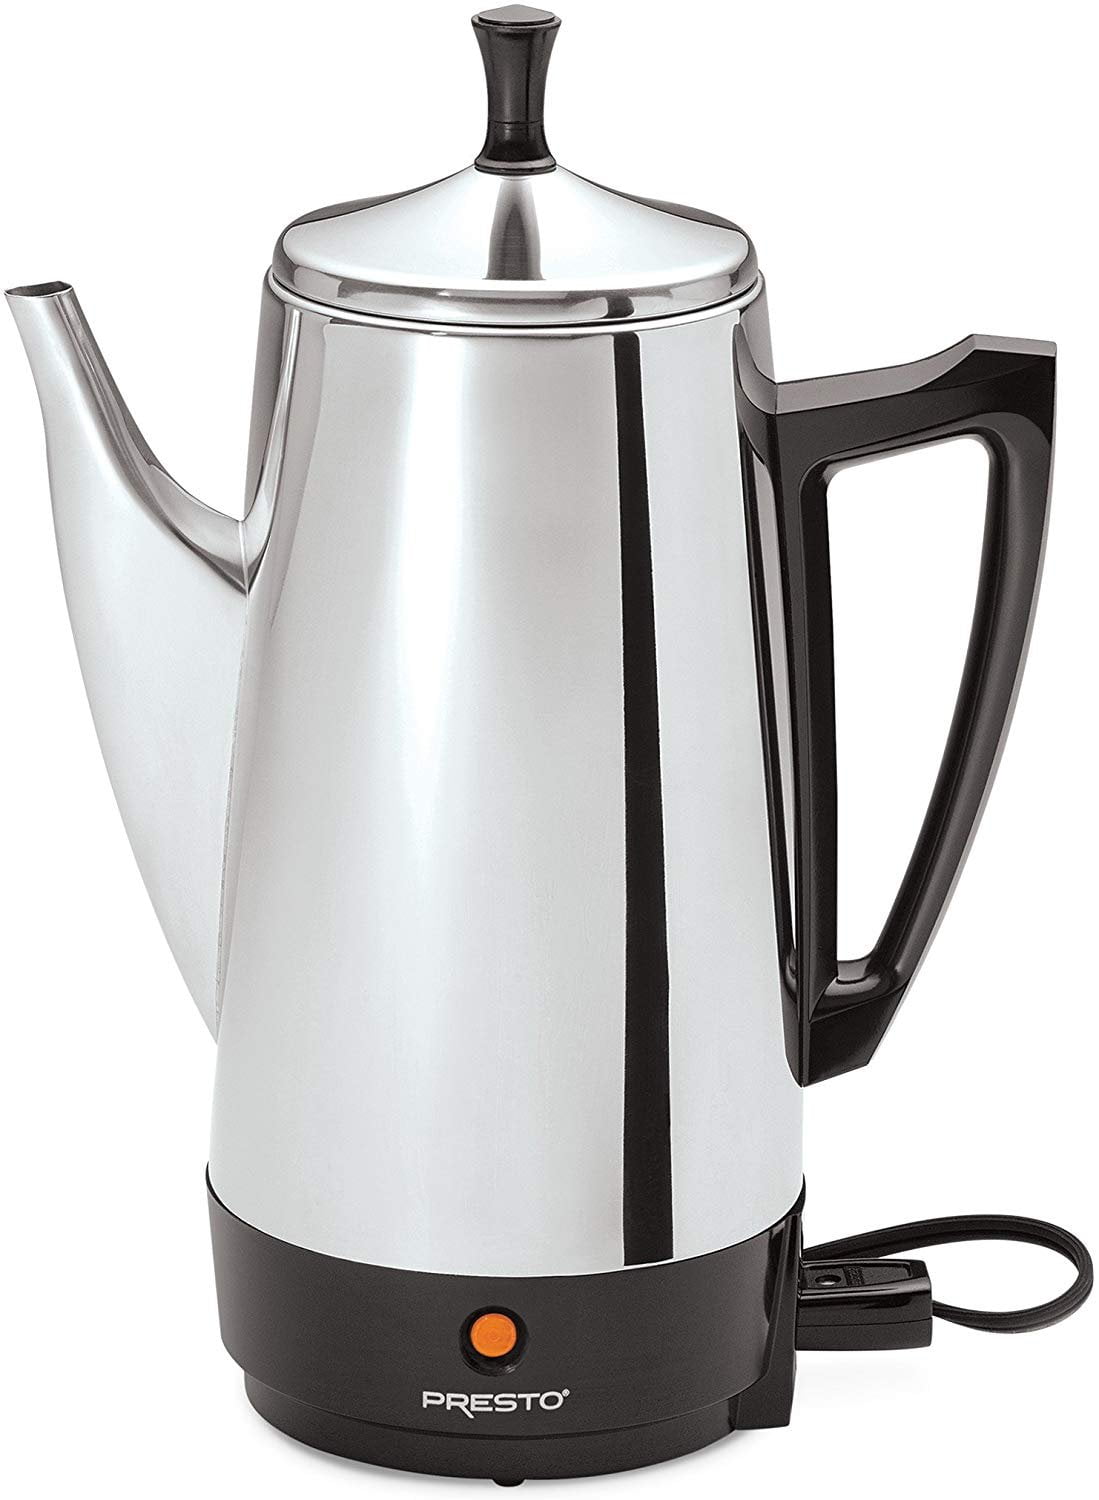 Presto 94643 Stainless Steel Basket for 6- Cup Percolator